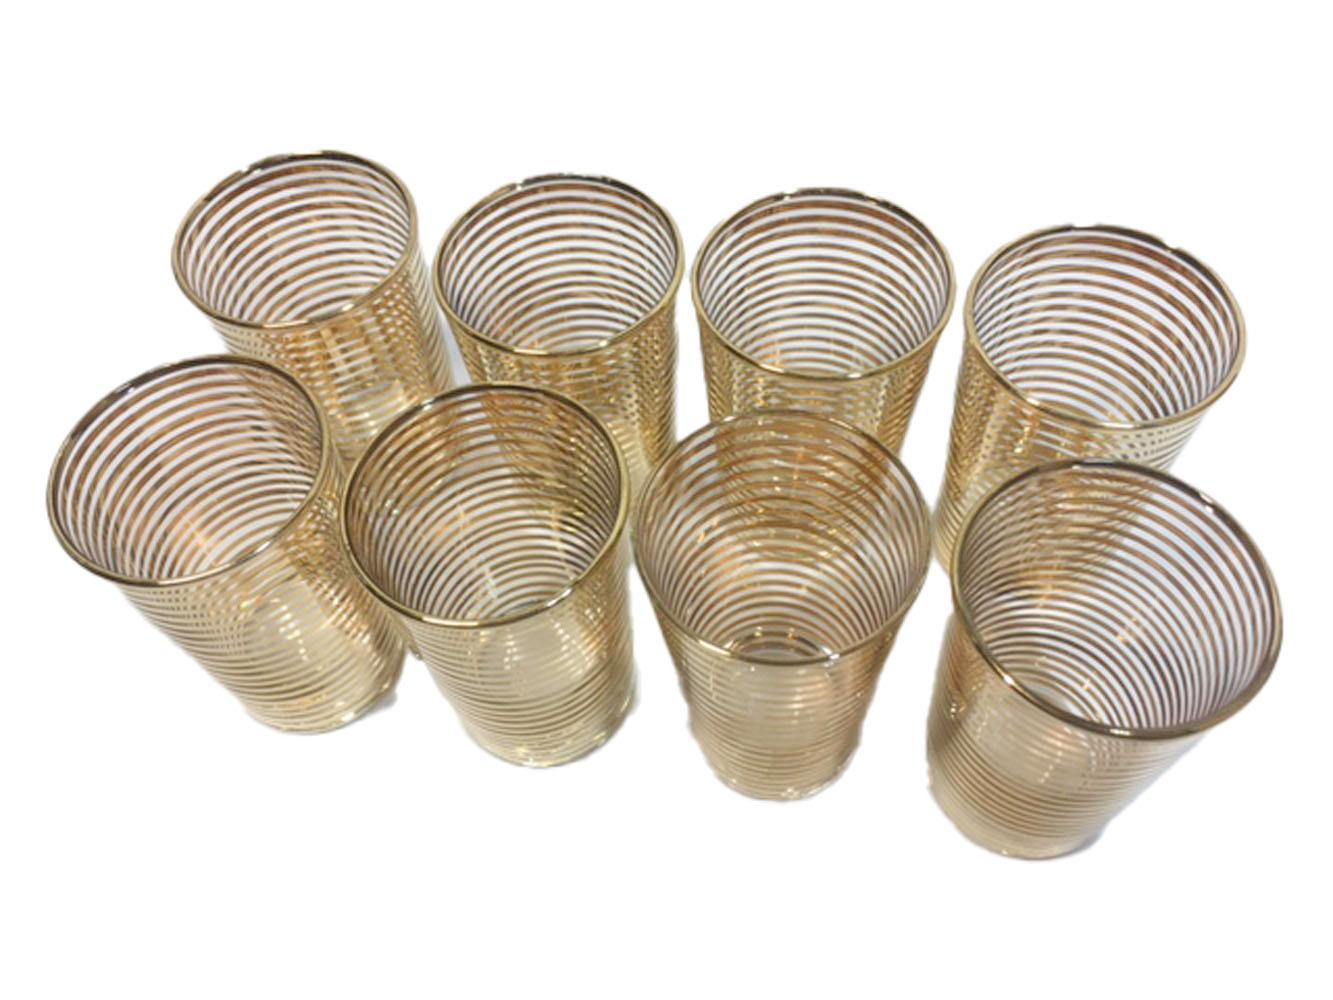 Eight vintage cocktail glasses with alternating gold and clear bands.